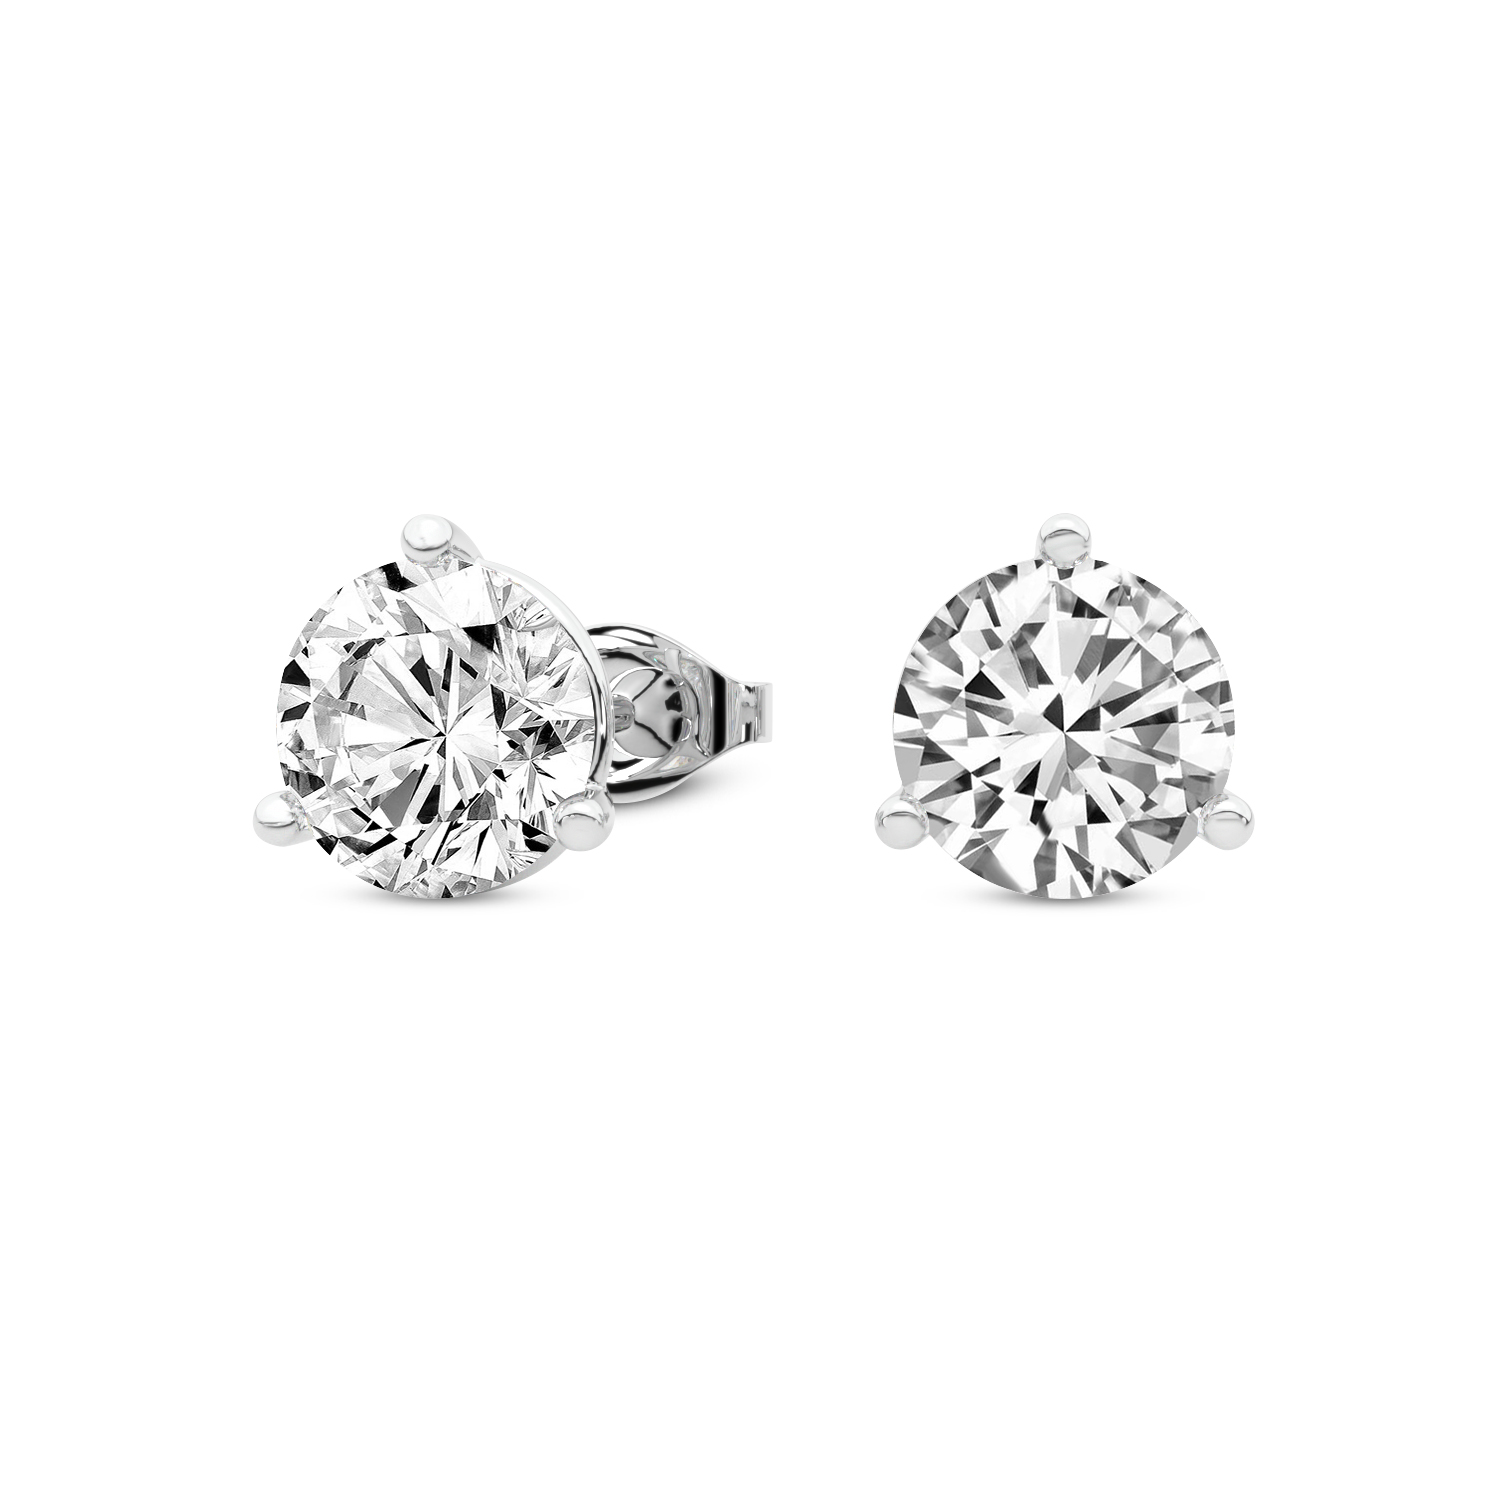 3 Prong Martini Round Lab Diamond Stud Earrings white gold earring, small right view